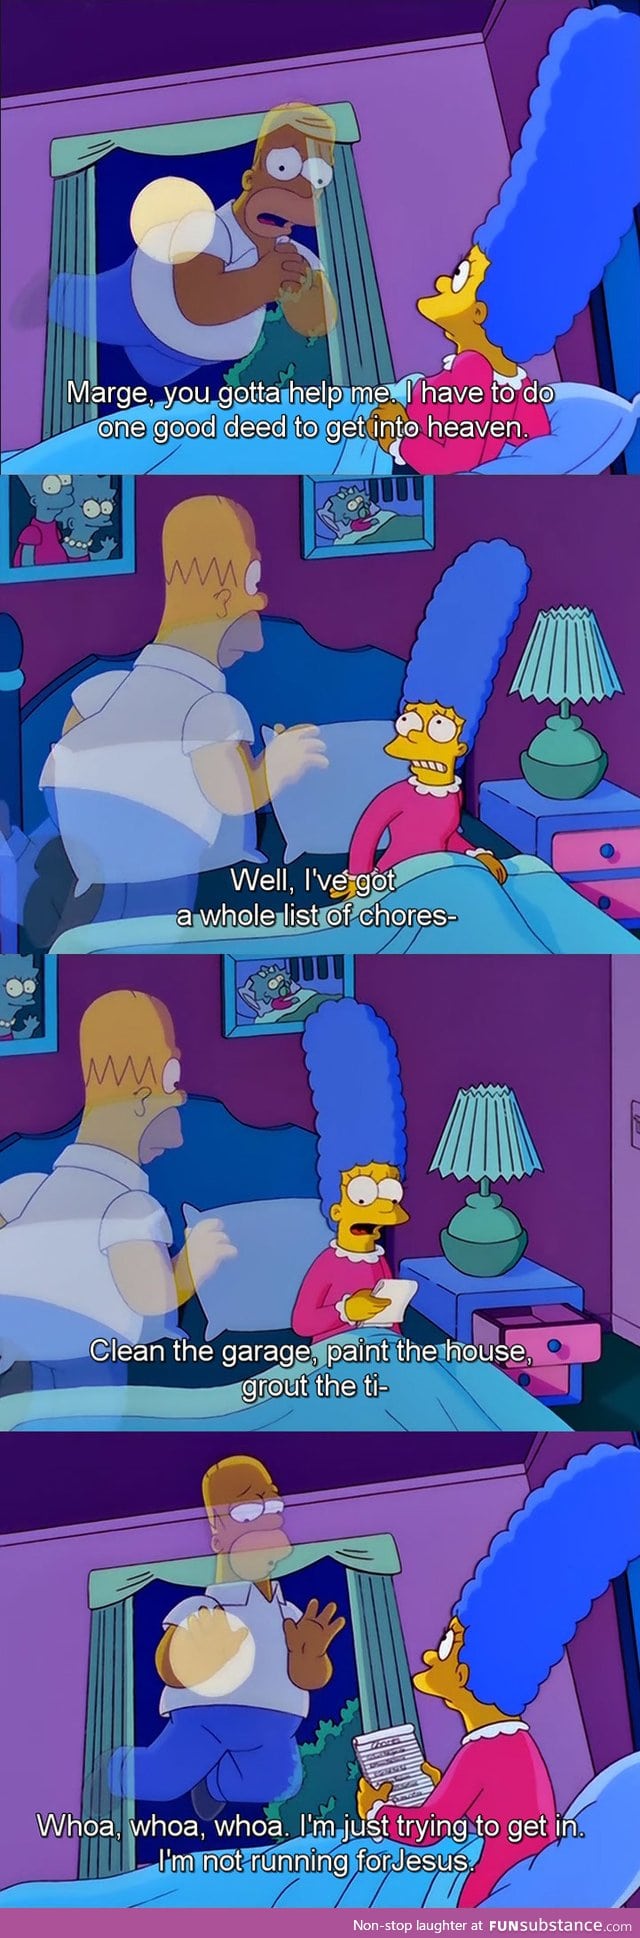 Homer has to make one good deed to get into heaven